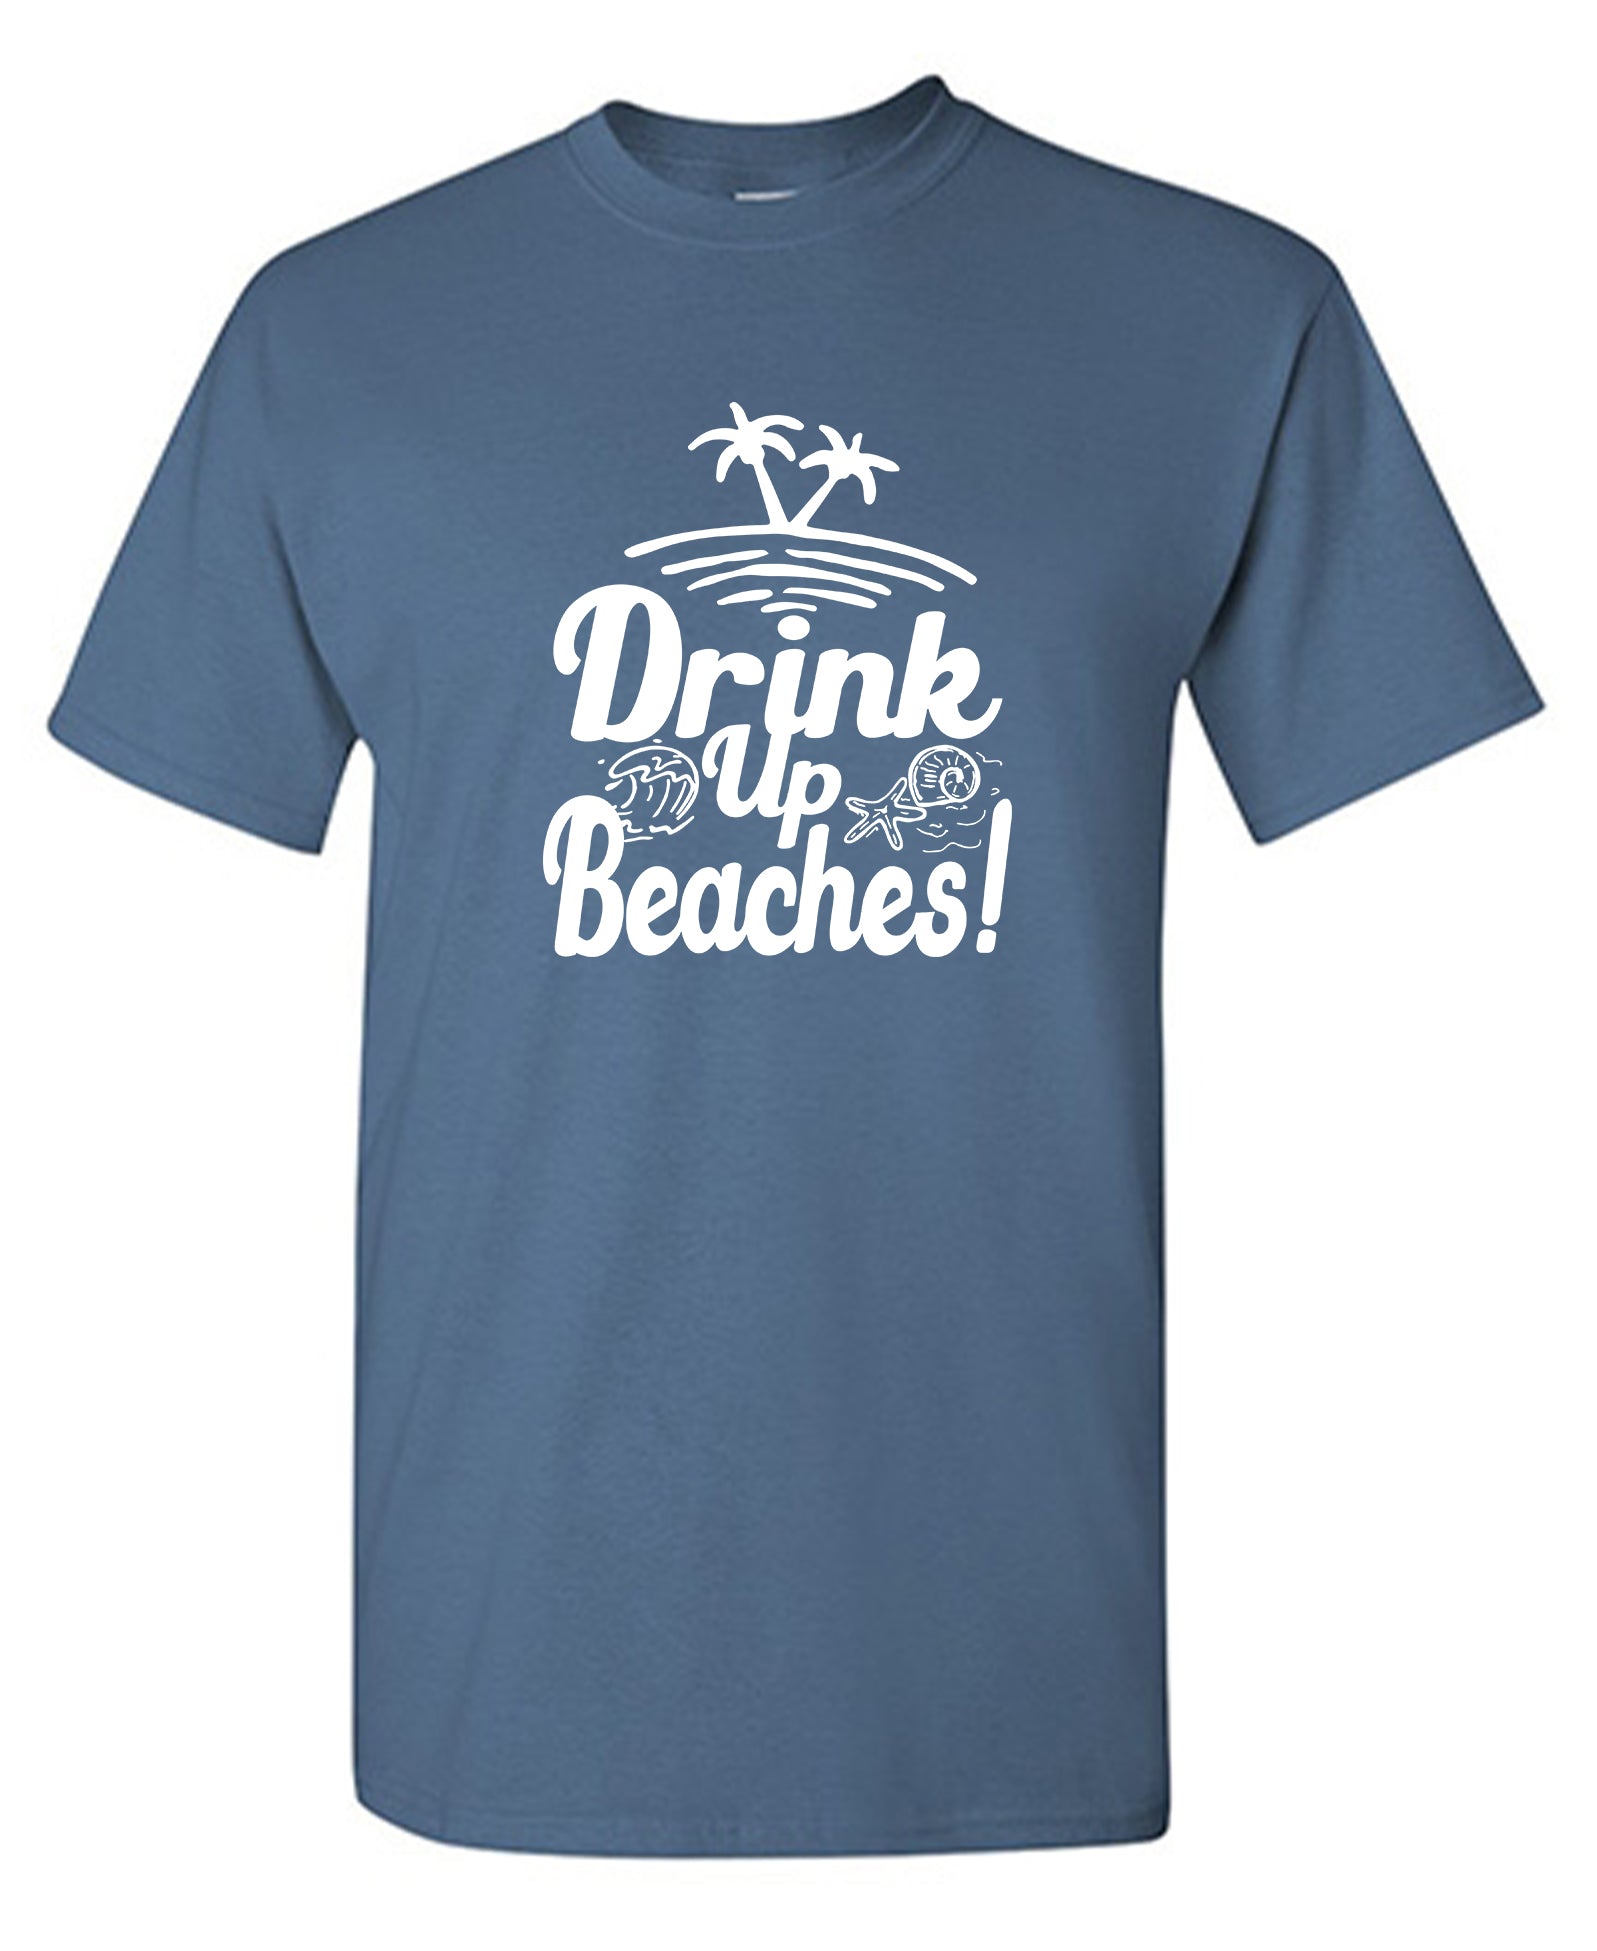 Drink Up Beaches - Funny T Shirts & Graphic Tees